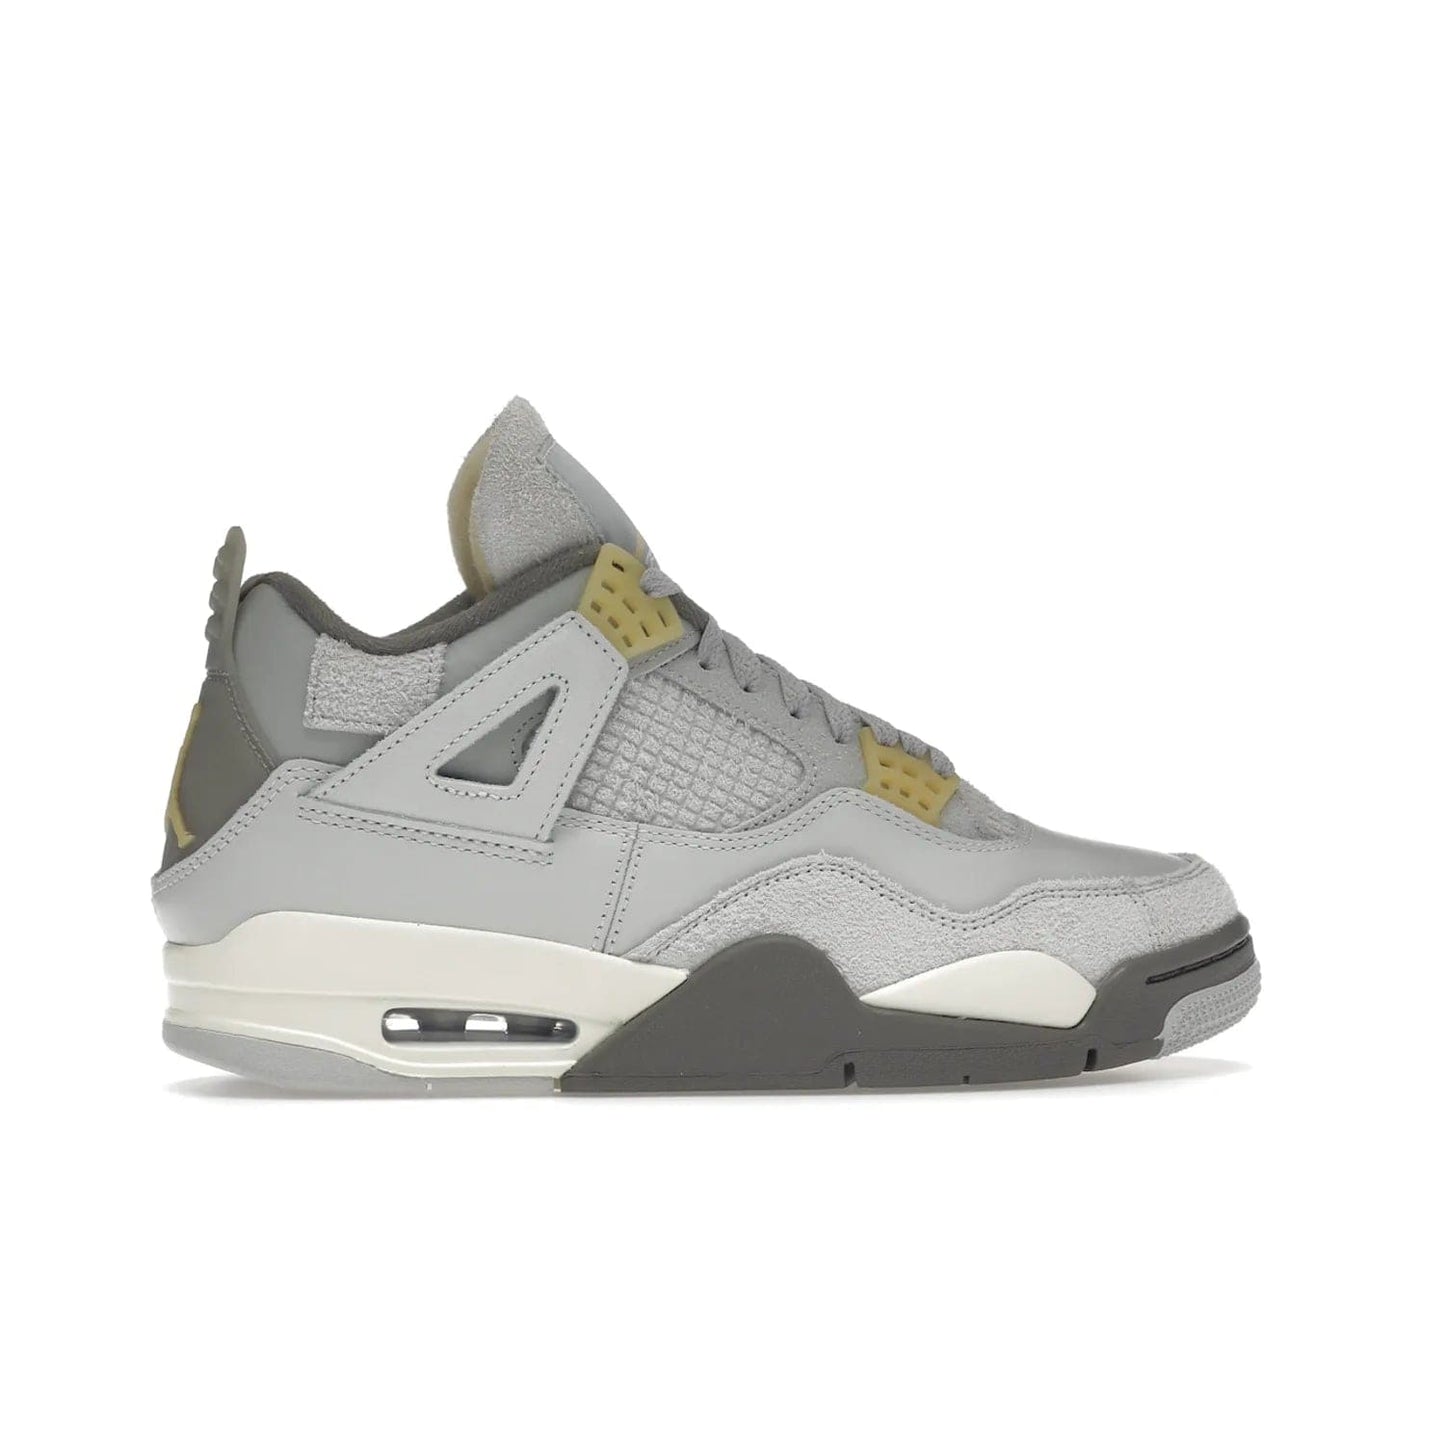 Jordan 4 Retro SE Craft Photon Dust - Image 36 - Only at www.BallersClubKickz.com - Upgrade your shoe collection with the Air Jordan 4 Retro SE Craft Photon Dust. This luxurious sneaker features a combination of suede and leather with unique grey tones like Photon Dust, Pale Vanilla, Off White, Grey Fog, Flat Pewter, and Sail. Available February 11, 2023.